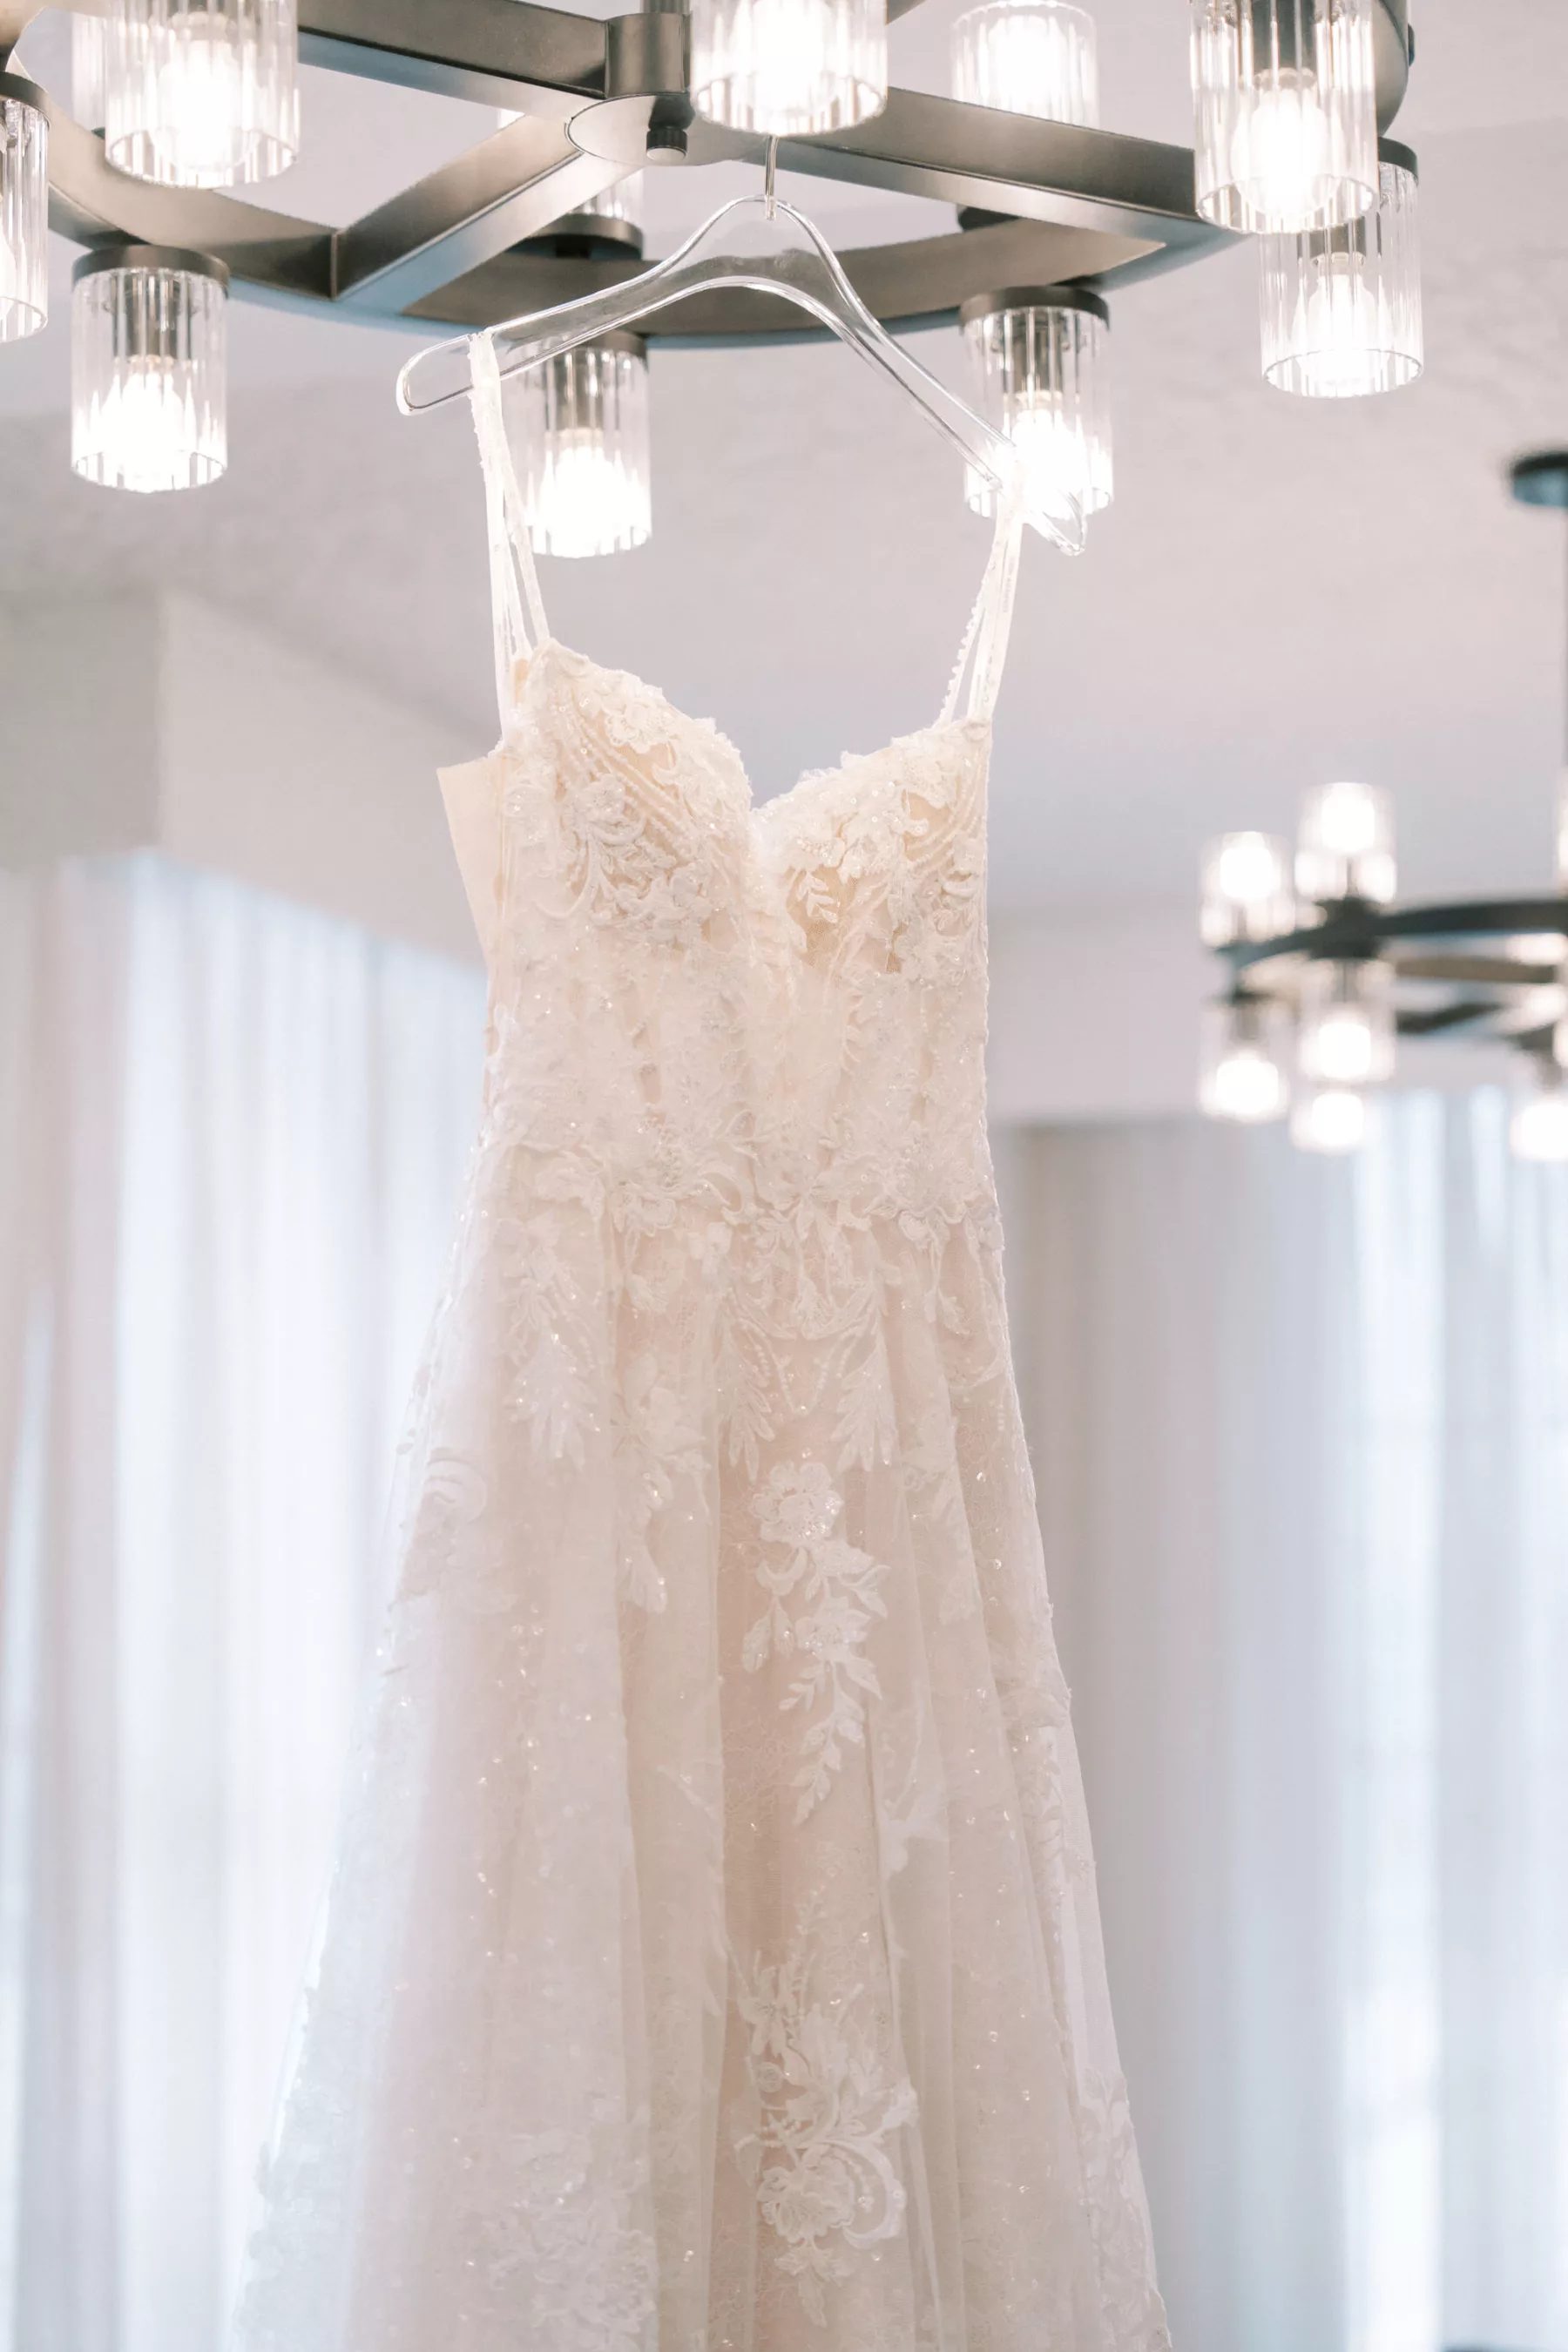 Nude and Ivory Beaded Lace A-line Wedding Dress Ideas | Tampa Bay Boutique Truly Forever Tampa